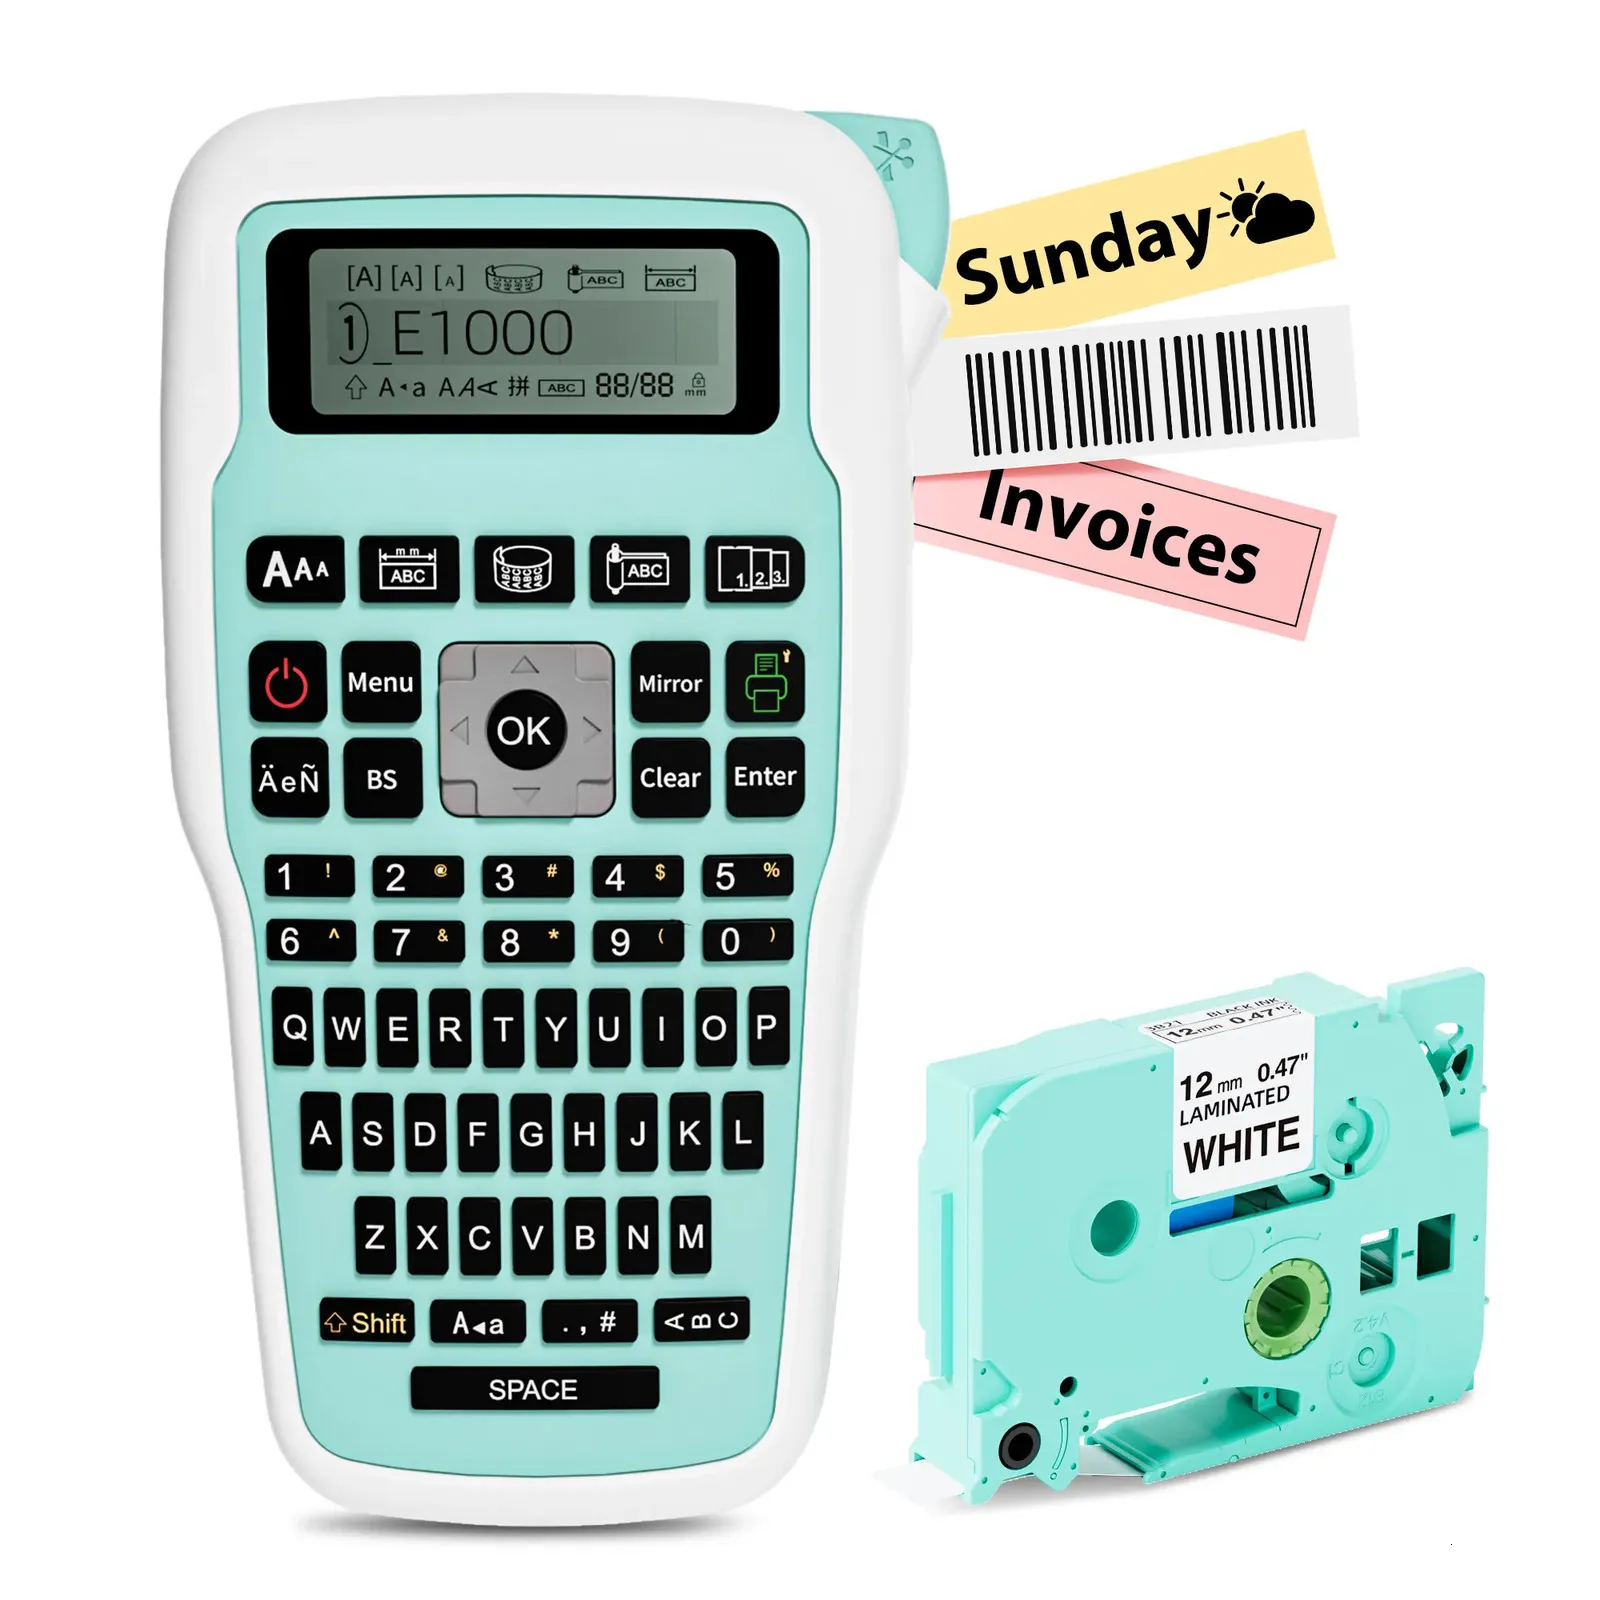 Skrivare Ribbons Vixic Handheld Label Maker E1000 Label Printer With Qwerty Keyboard Portable Machince USB Connect for P-Touch Label Maker Tze231 231116